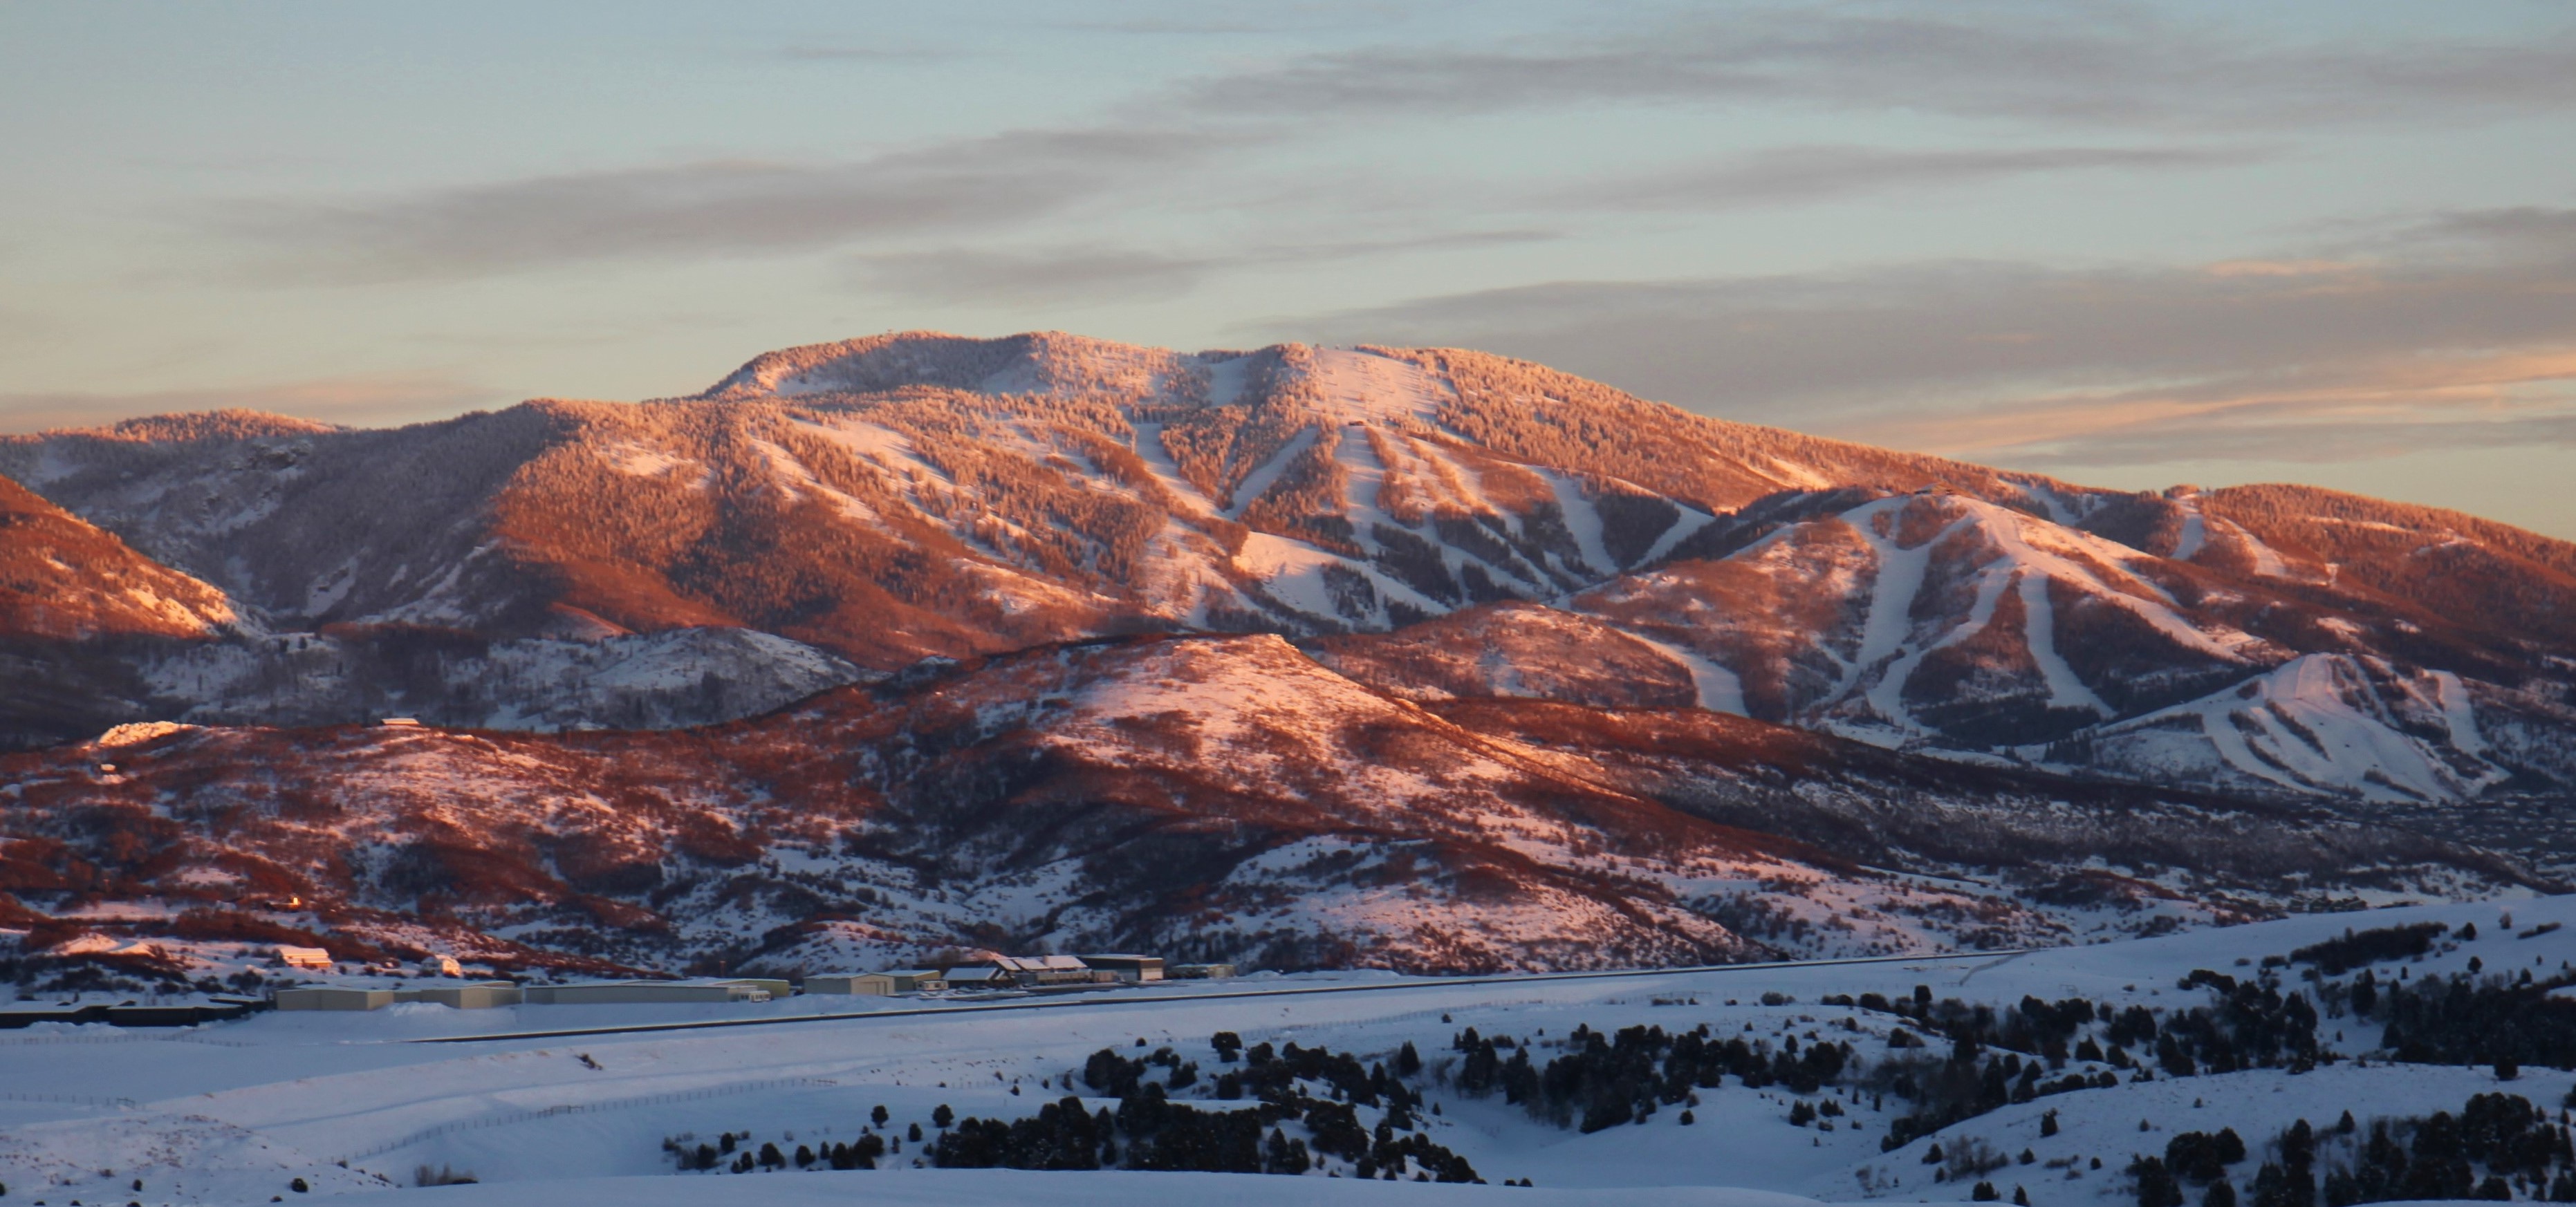 Mt. Werner glows over Steamboat Springs, Colorado